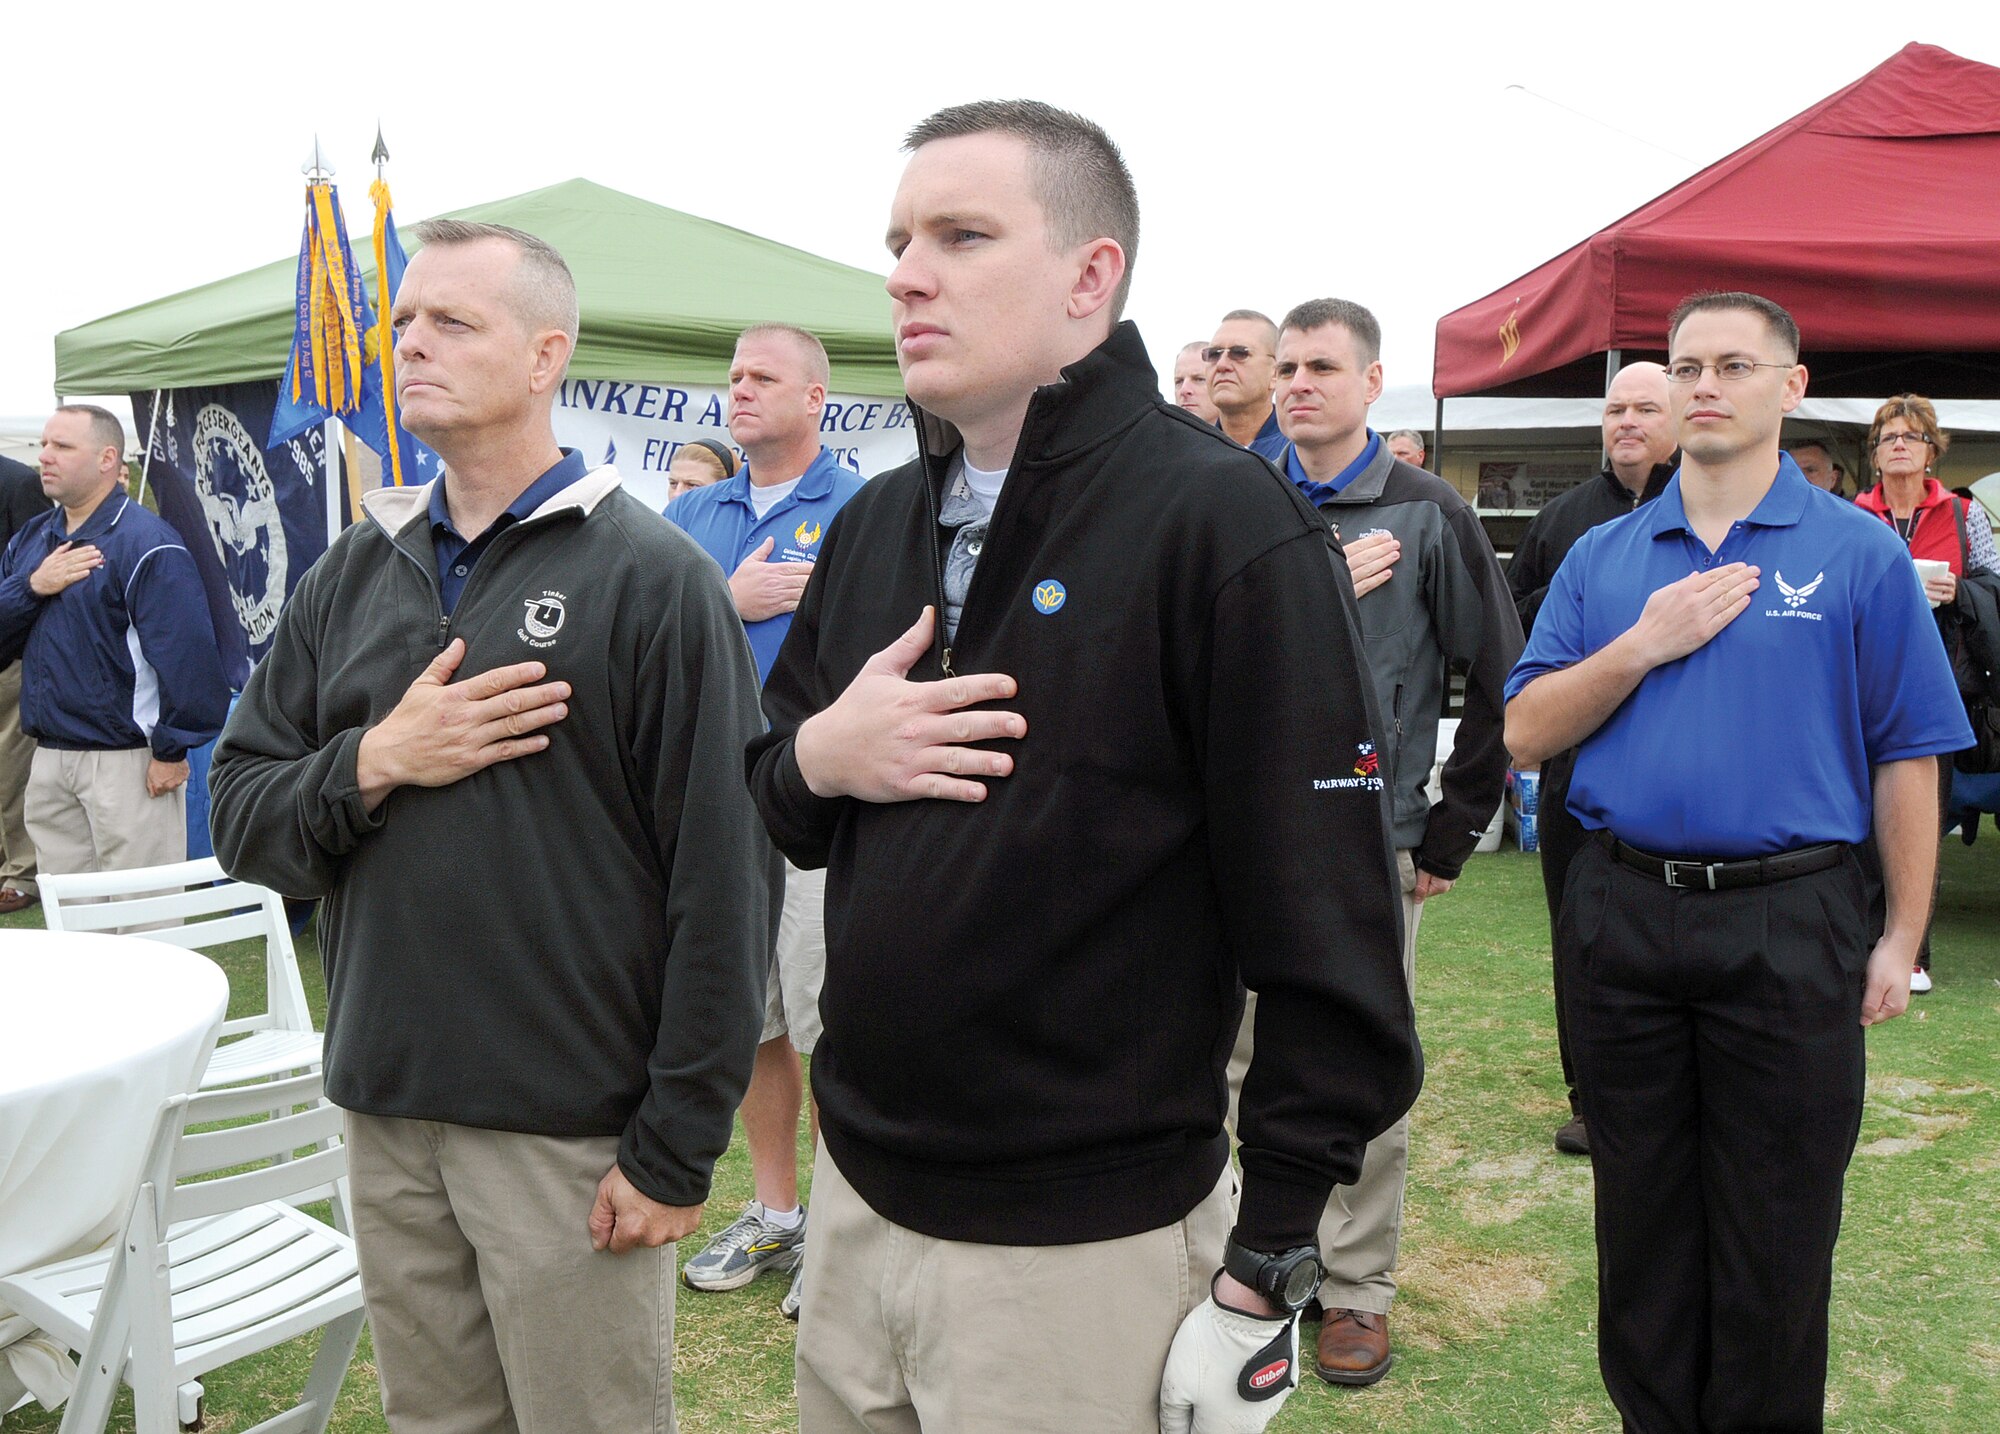 Volunteers from Tinker organizations staffed an information booth at the Fairways for Freedom golf tournament in Oklahoma City Oct. 5, showing their support in the community for those wounded while serving. Standing with Tinker supporters, Senior Airman Michael Helsdingen, a Wounded Warrior from the 72nd Security Forces Squadron Armory, foreground center, honors the national anthem during opening ceremonies before joining the other golfers. Beside him, left, is Master Sgt. Michael Bartels, 552nd Air Control Networking Squadron first sergeant. First Lt. Joseph Owens, president of the Tinker Company Grade Officer’s Council is far right.  (Air Force photo by Margo Wright)